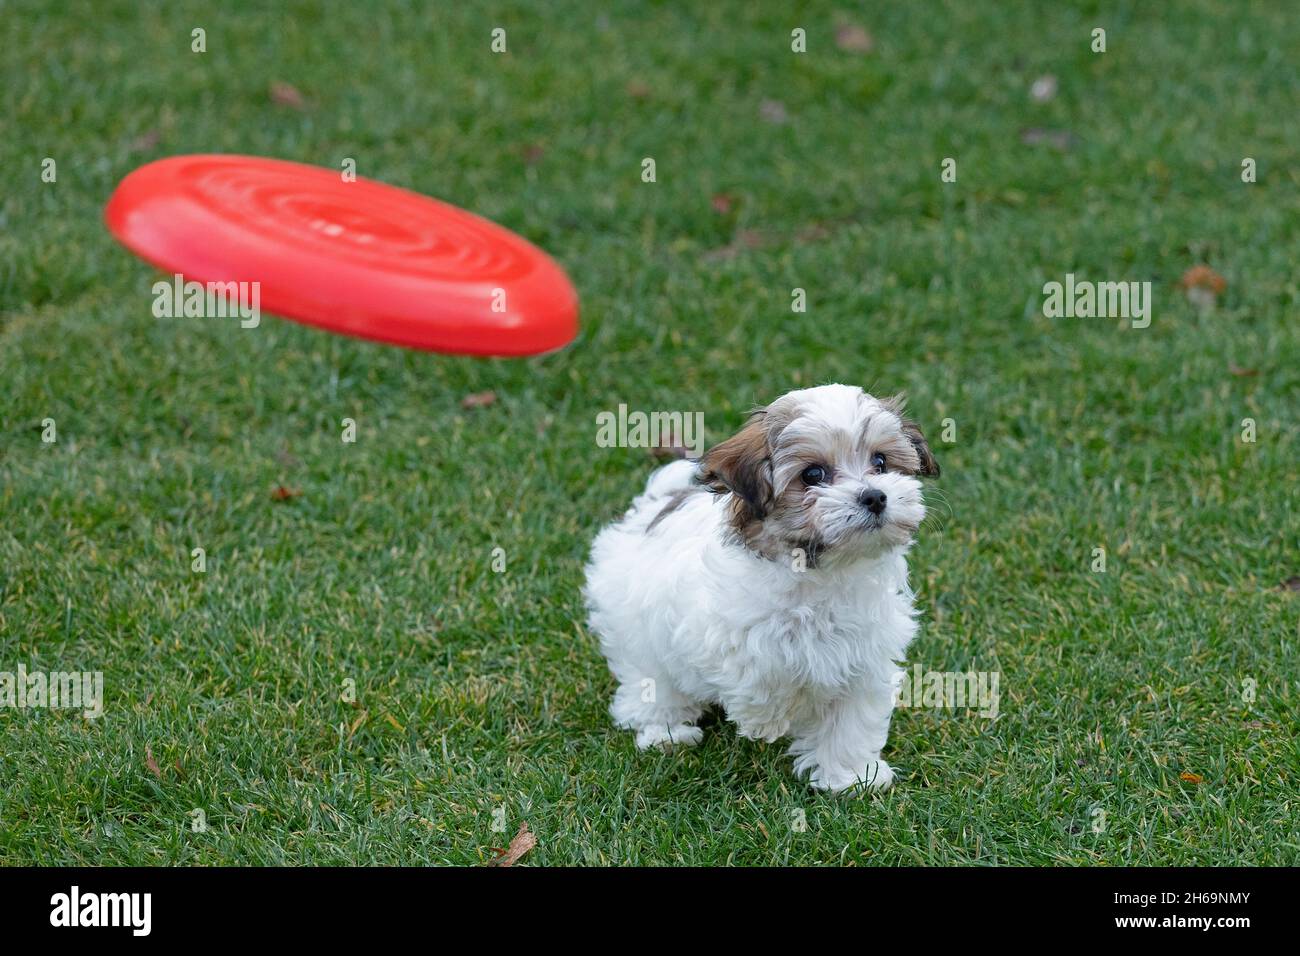 Bolonka Zwetna toy dog pup looking at flying frisbee disc, Germany Stock Photo